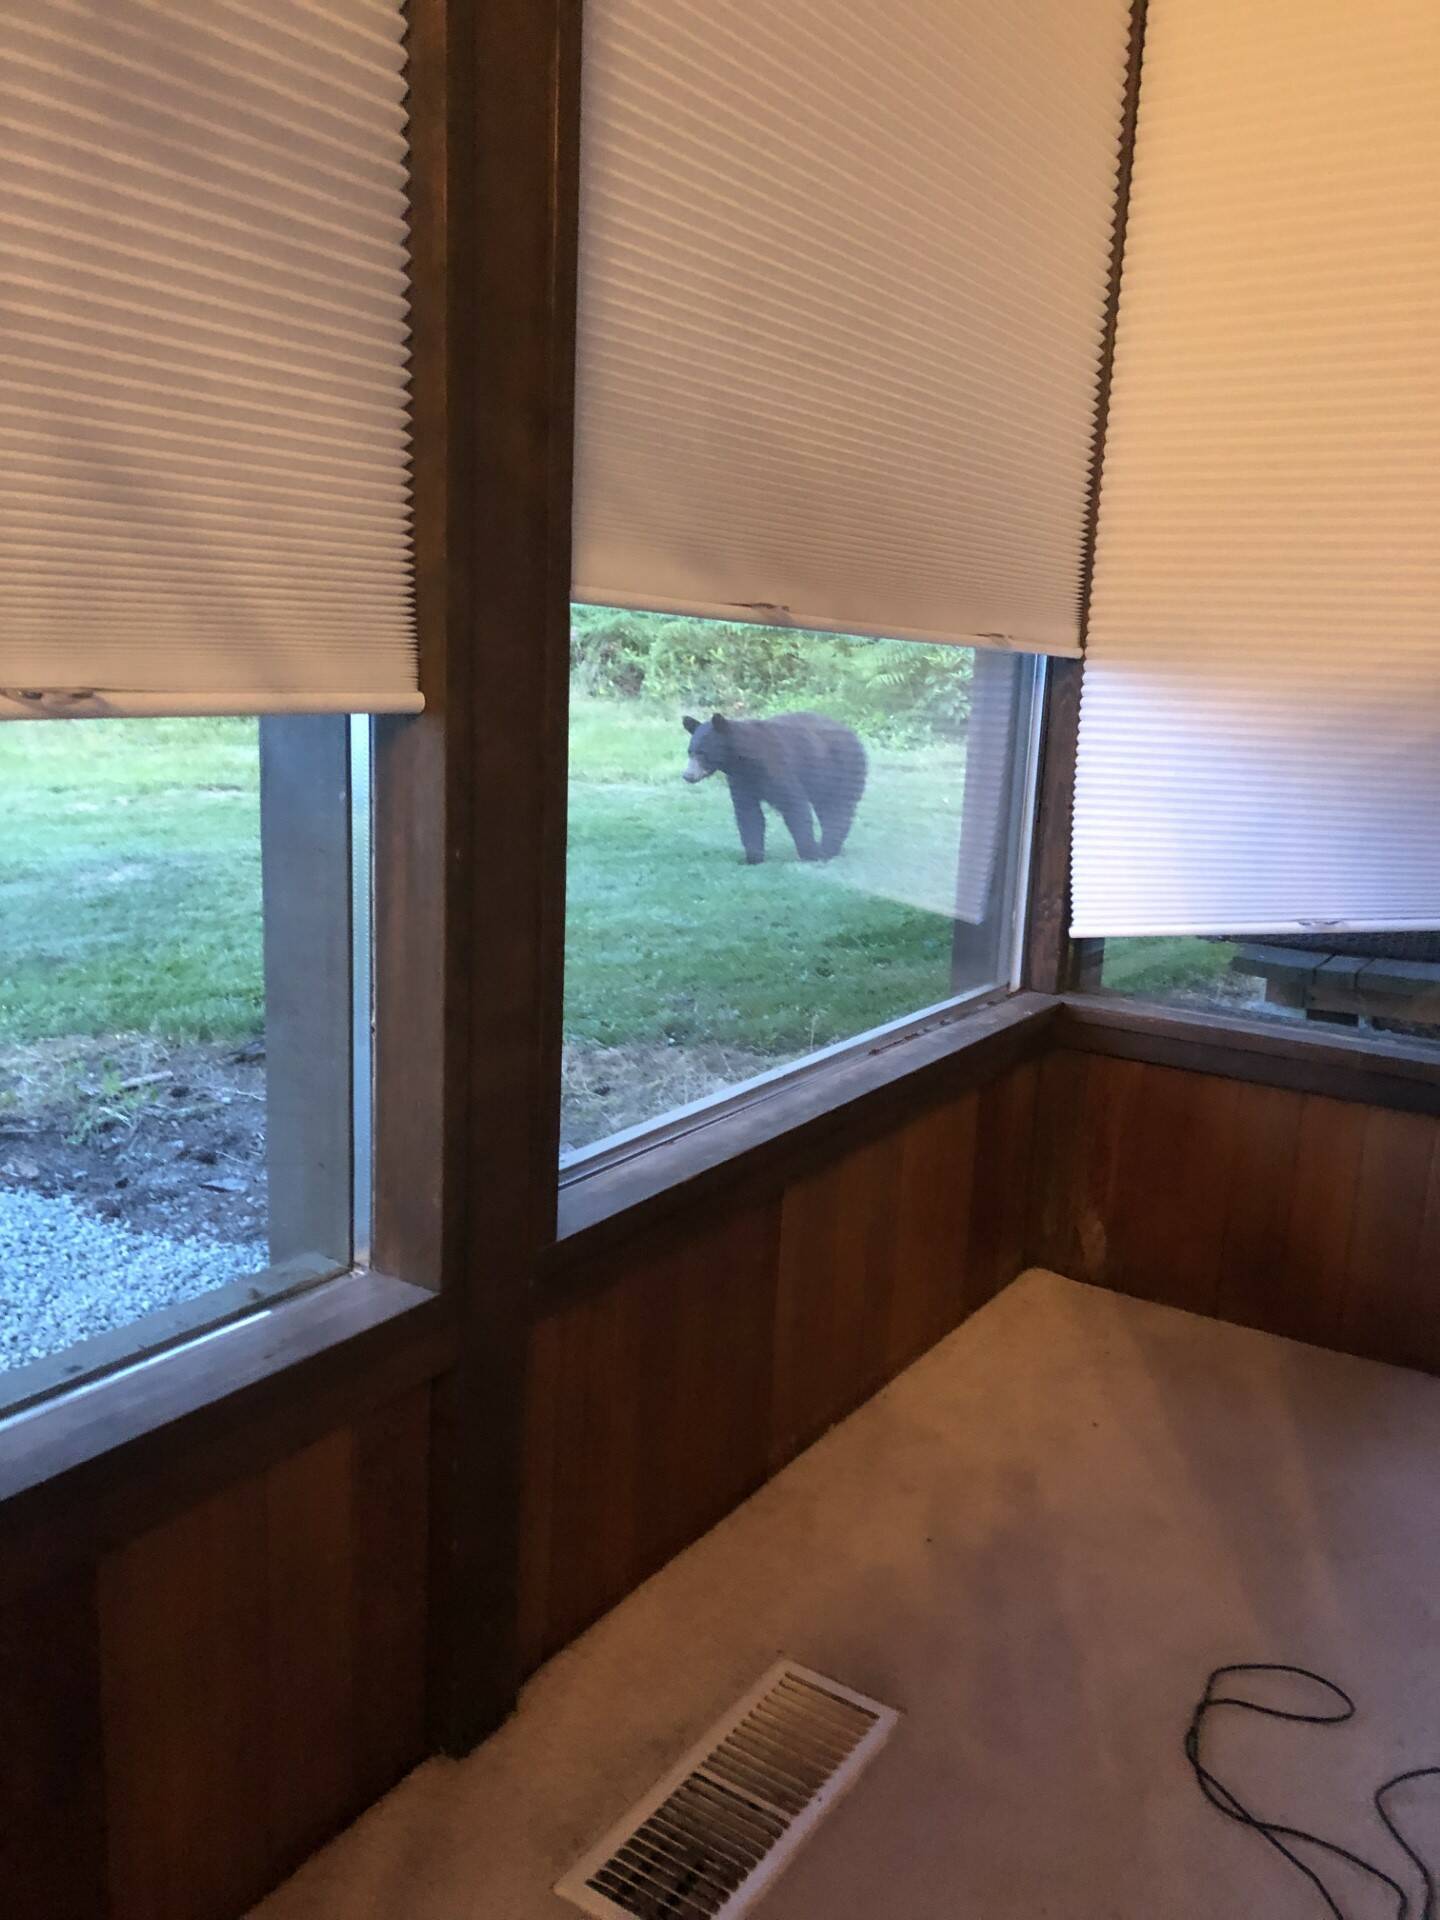 A North Whidbey resident captured this photo of a bear Wednesday evening in the Strawberry Point area. (Photo provided)